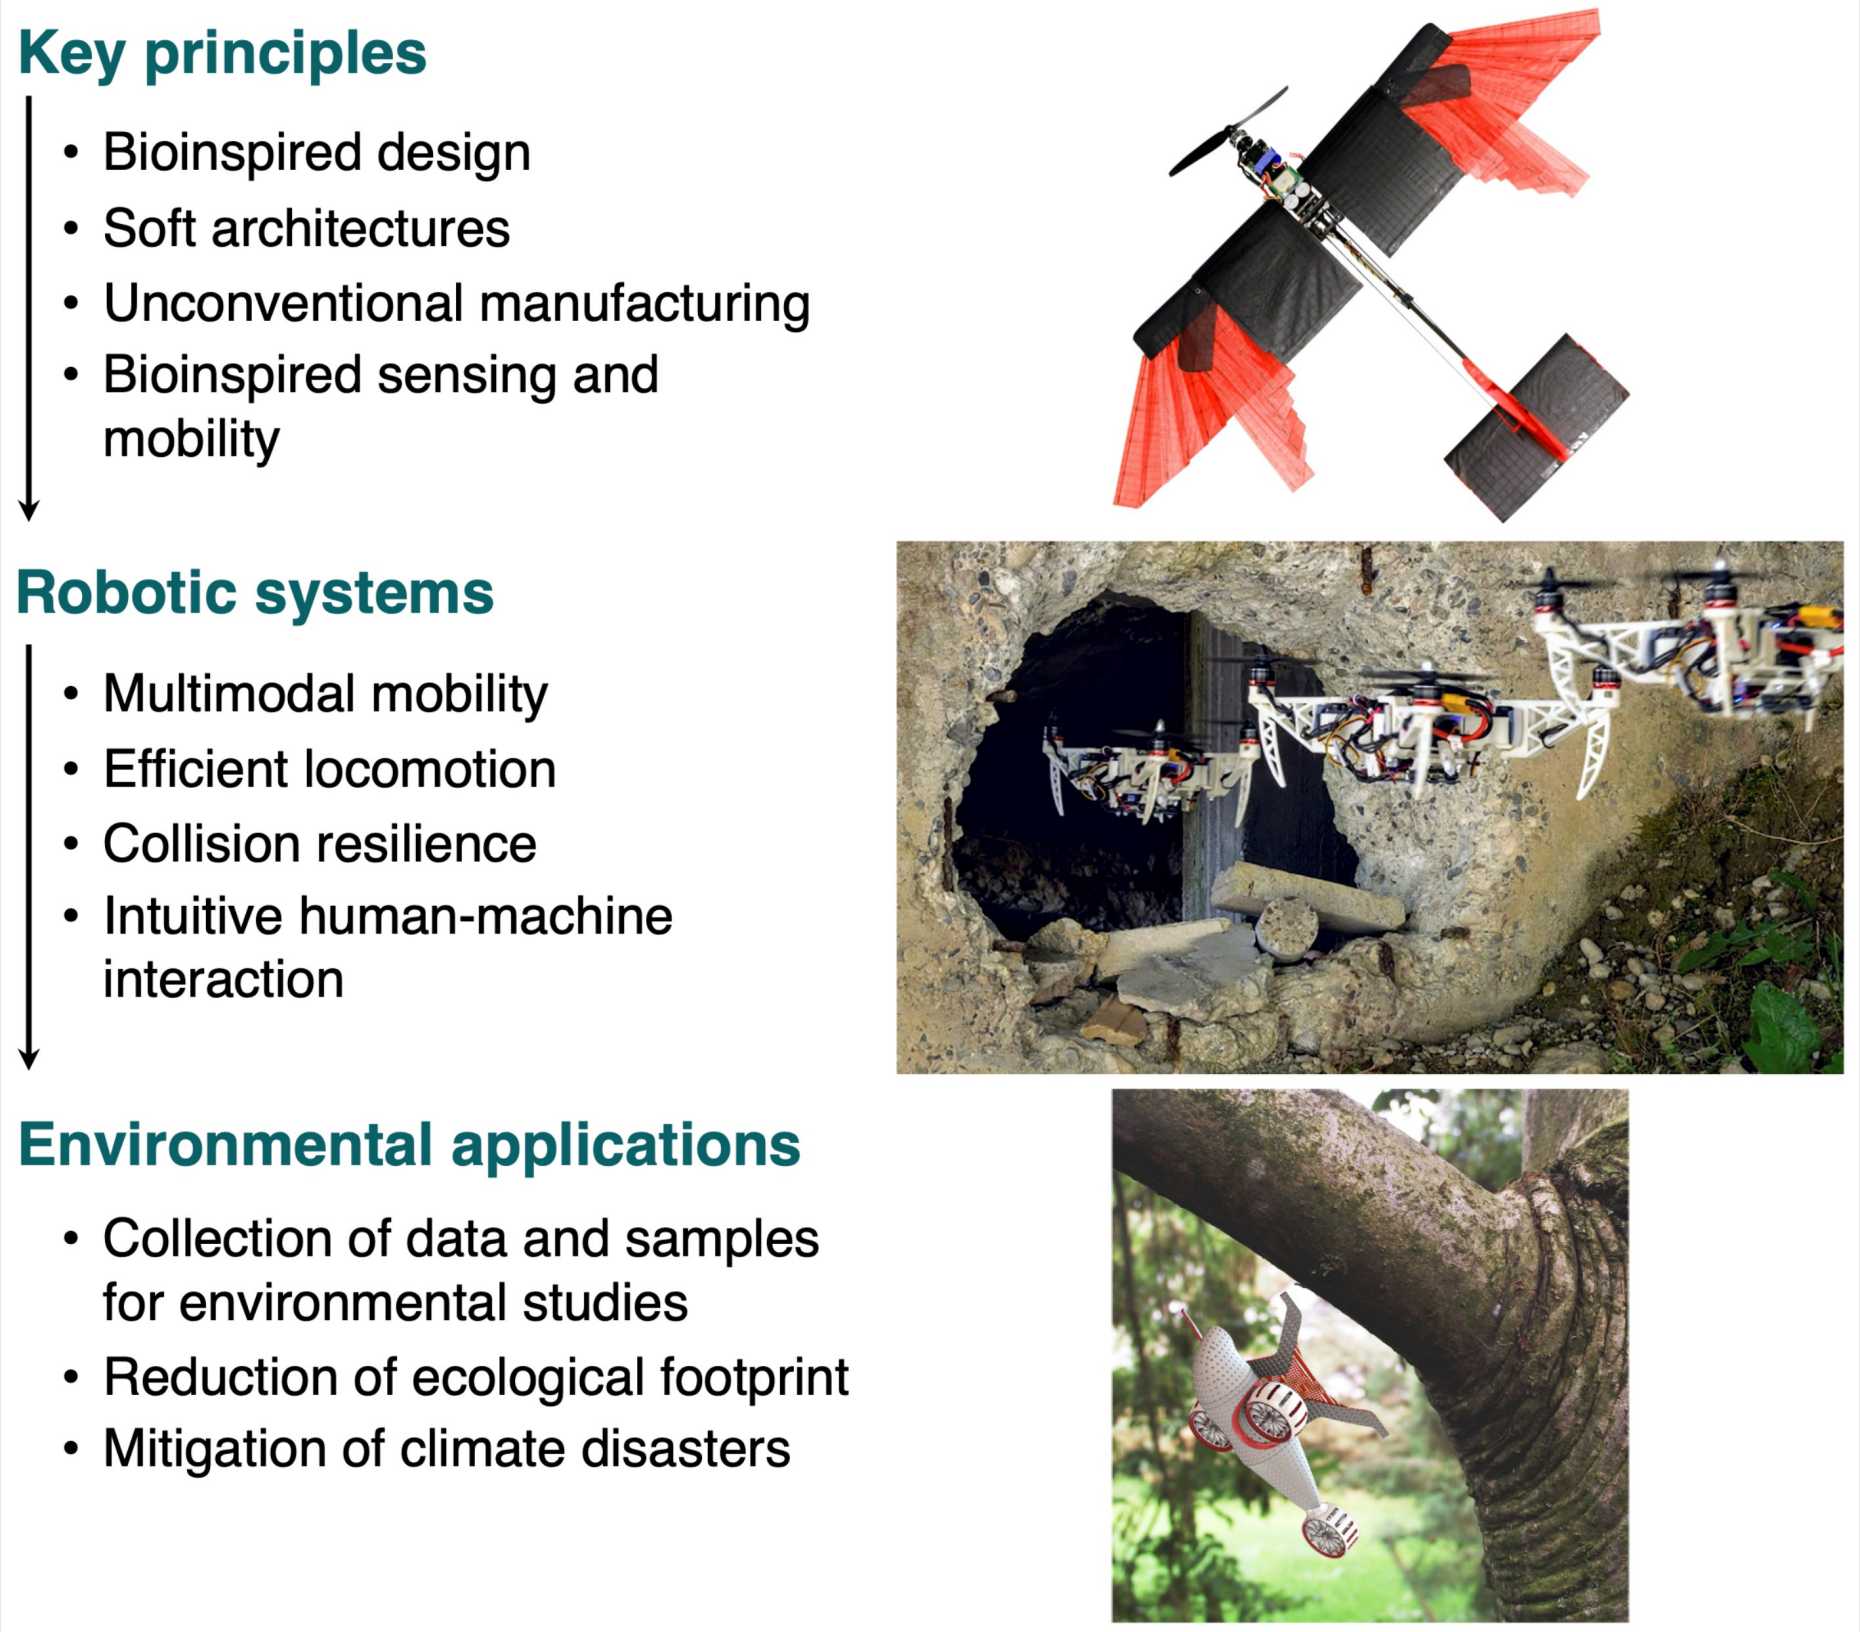 Description of the Research: Images of drones - Key principles: Bioinspired design, Soft architectures, Unconventional manufacturing, Bioinspired sensing and mobility. Robotic systems: Multimodal mobility, Efficient locomotion, Collision resilience, Intuitive human-machine interaction. Environmental applications: Collection of data and samples for environmental studies, Reduction of ecological footprint, Mitigation of climate disasters